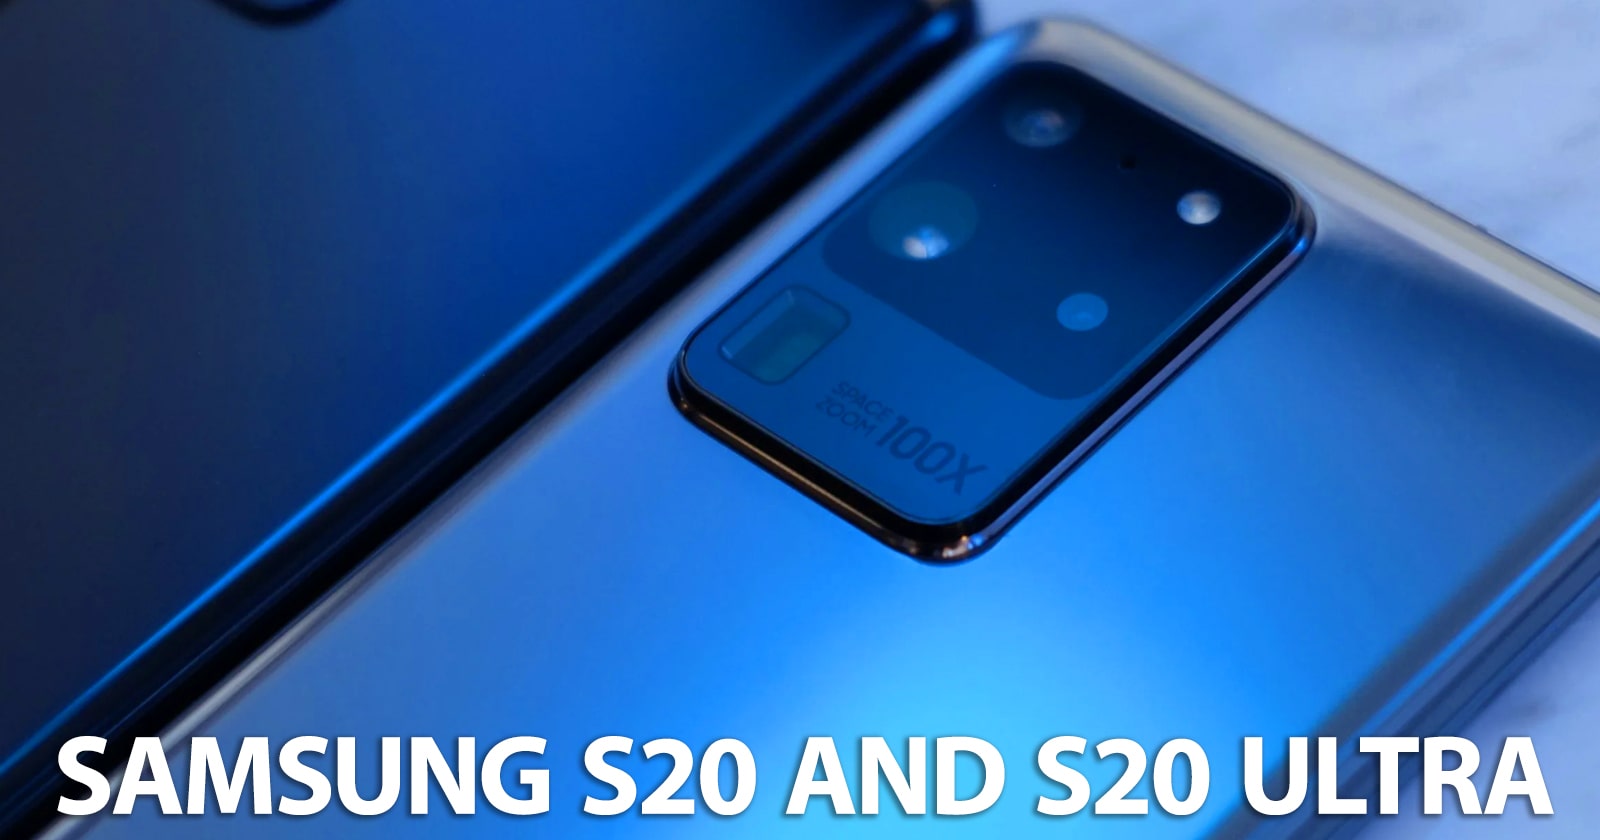 What Is the Difference Between Samsung S20 and S20 Ultra